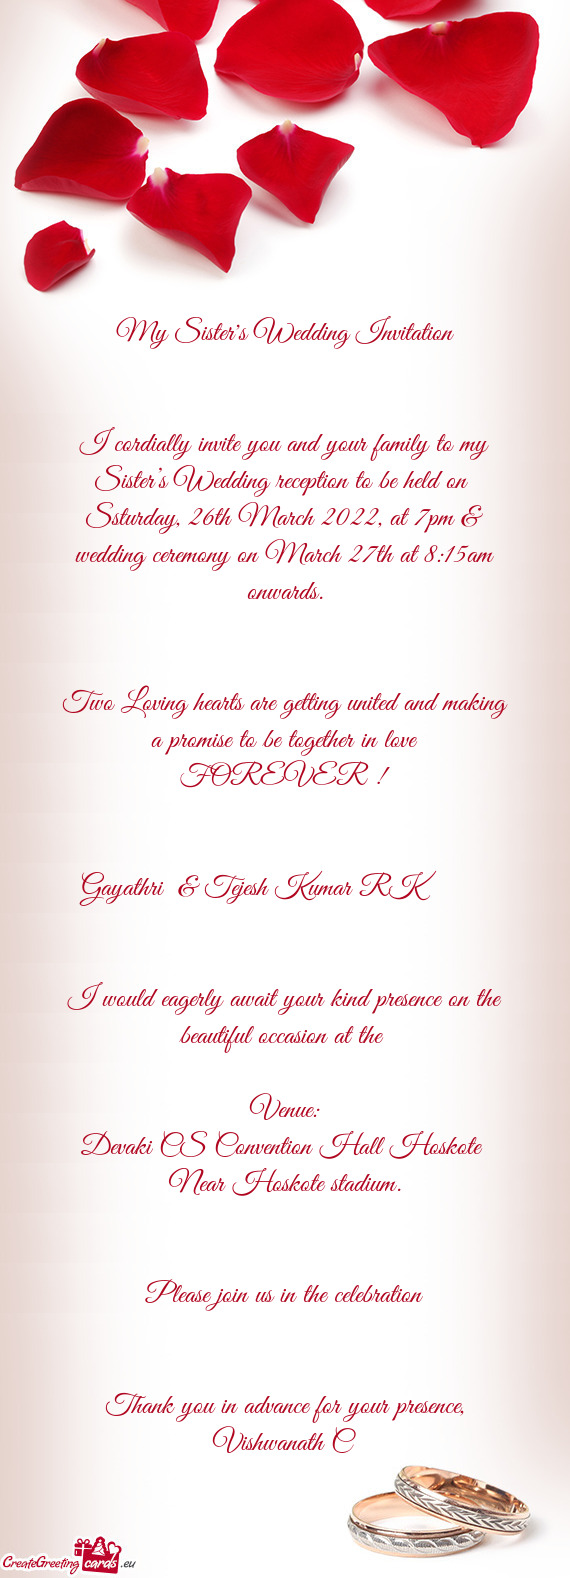 Ssturday, 26th March 2022, at 7pm & wedding ceremony on March 27th at 8:15am onwards